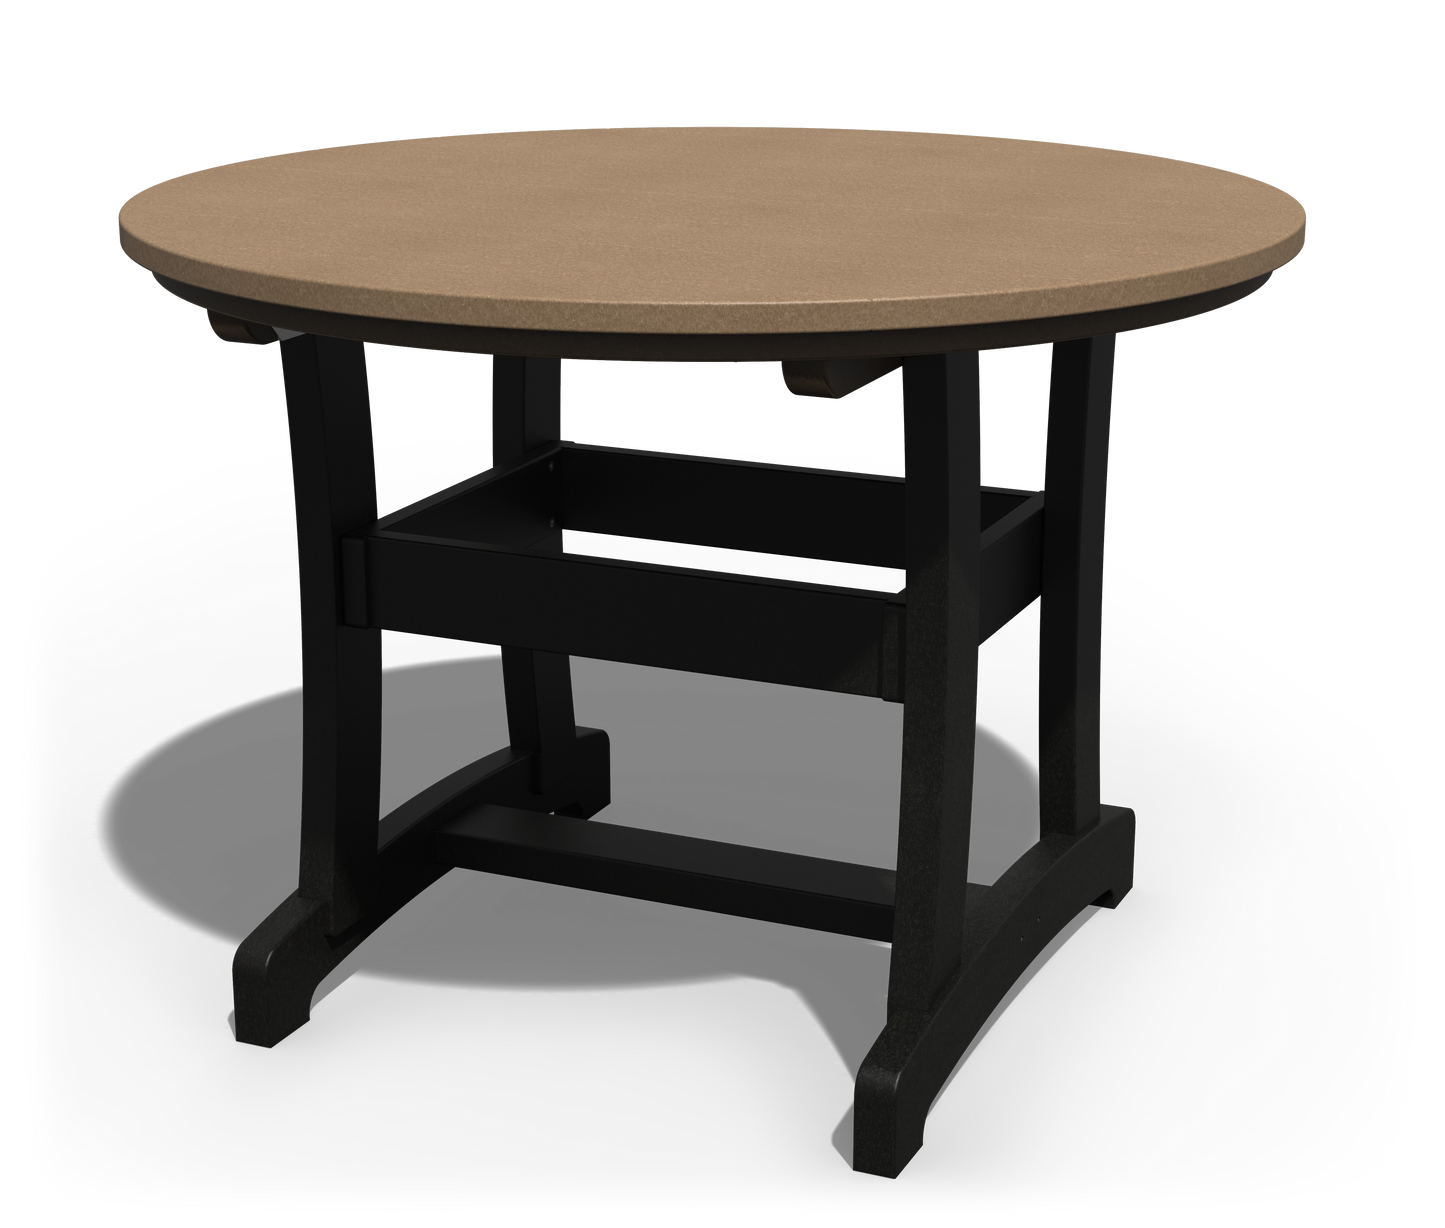 Patiova Recycled Plastic 42" Round Legacy Dining Table - LEAD TIME TO SHIP 4 WEEKS